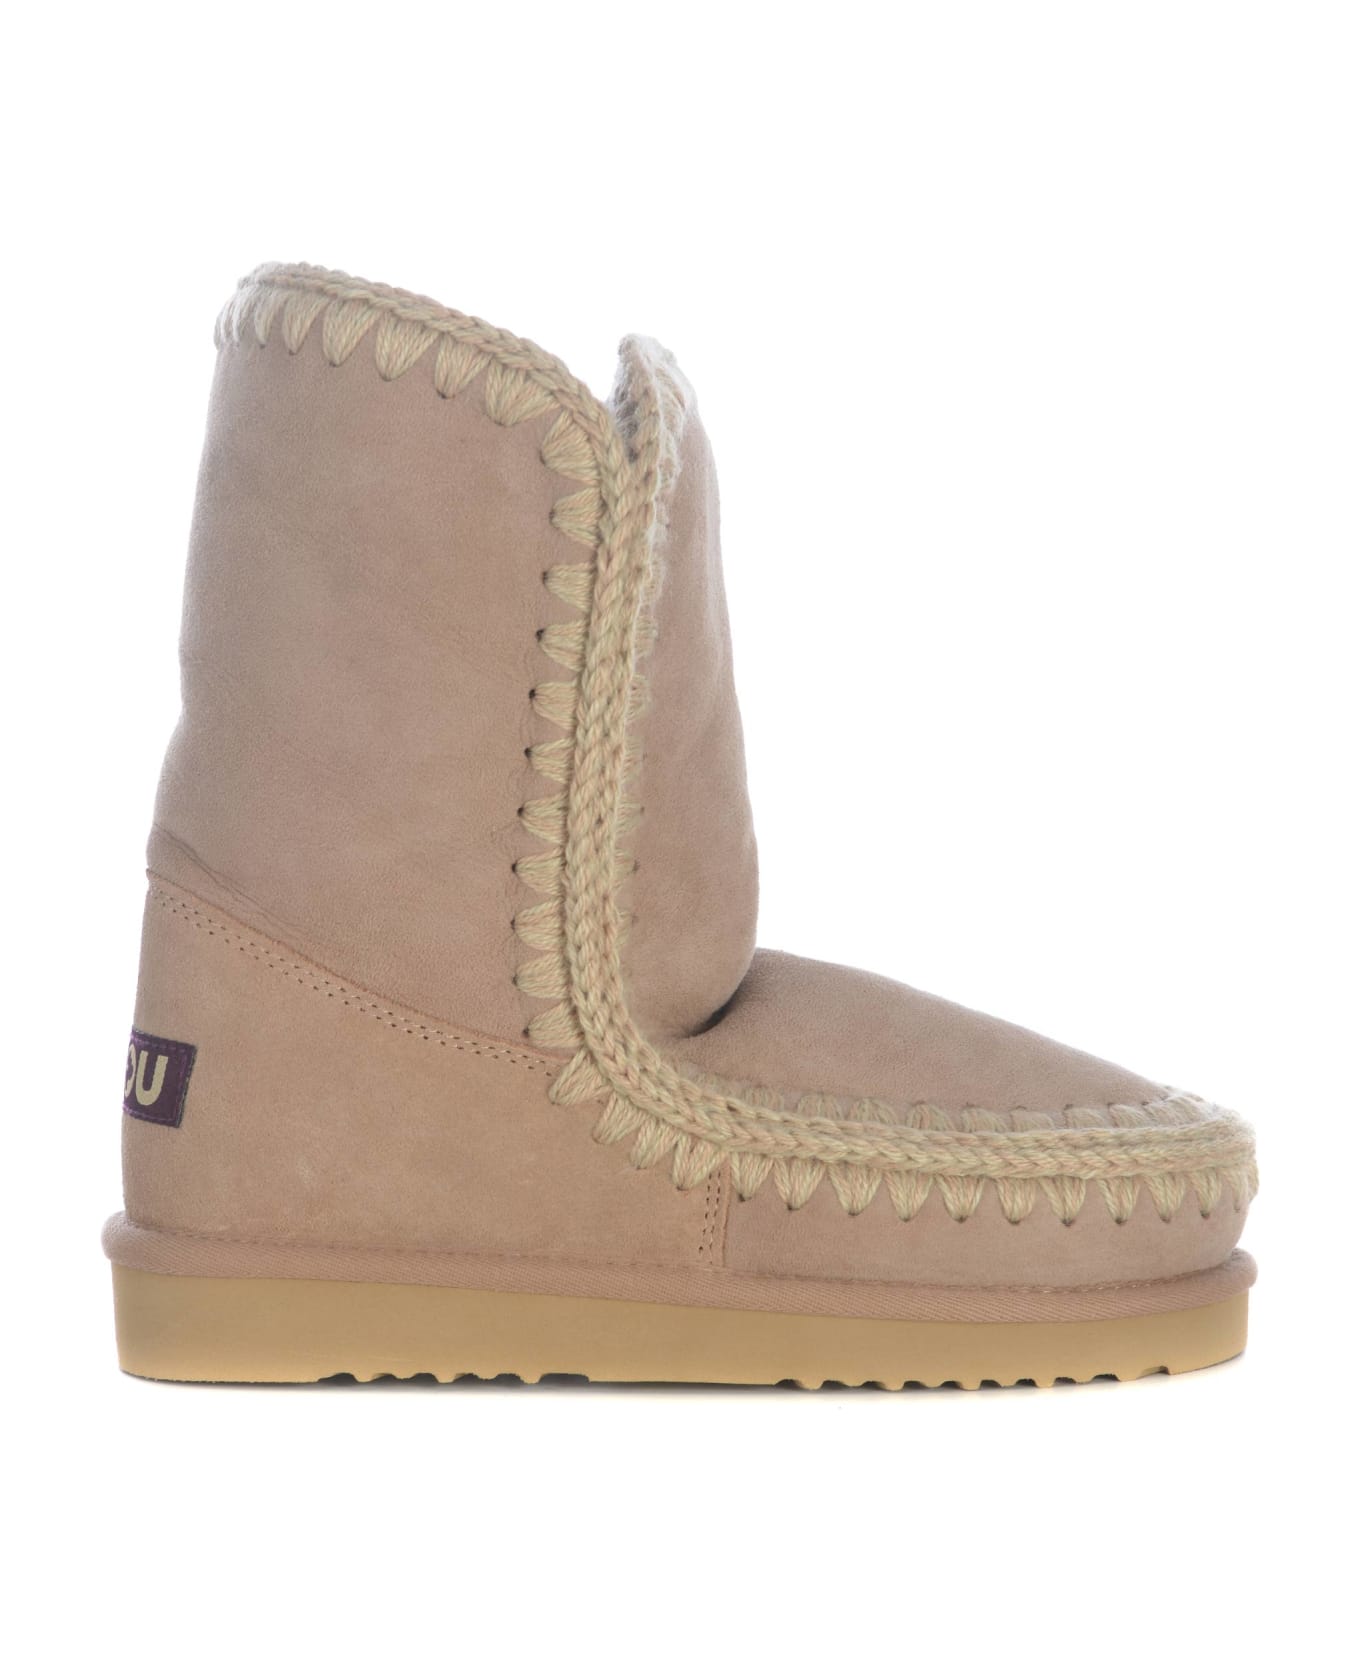 Mou Boots Mou "eskimo24" Made In Suede - Cammello